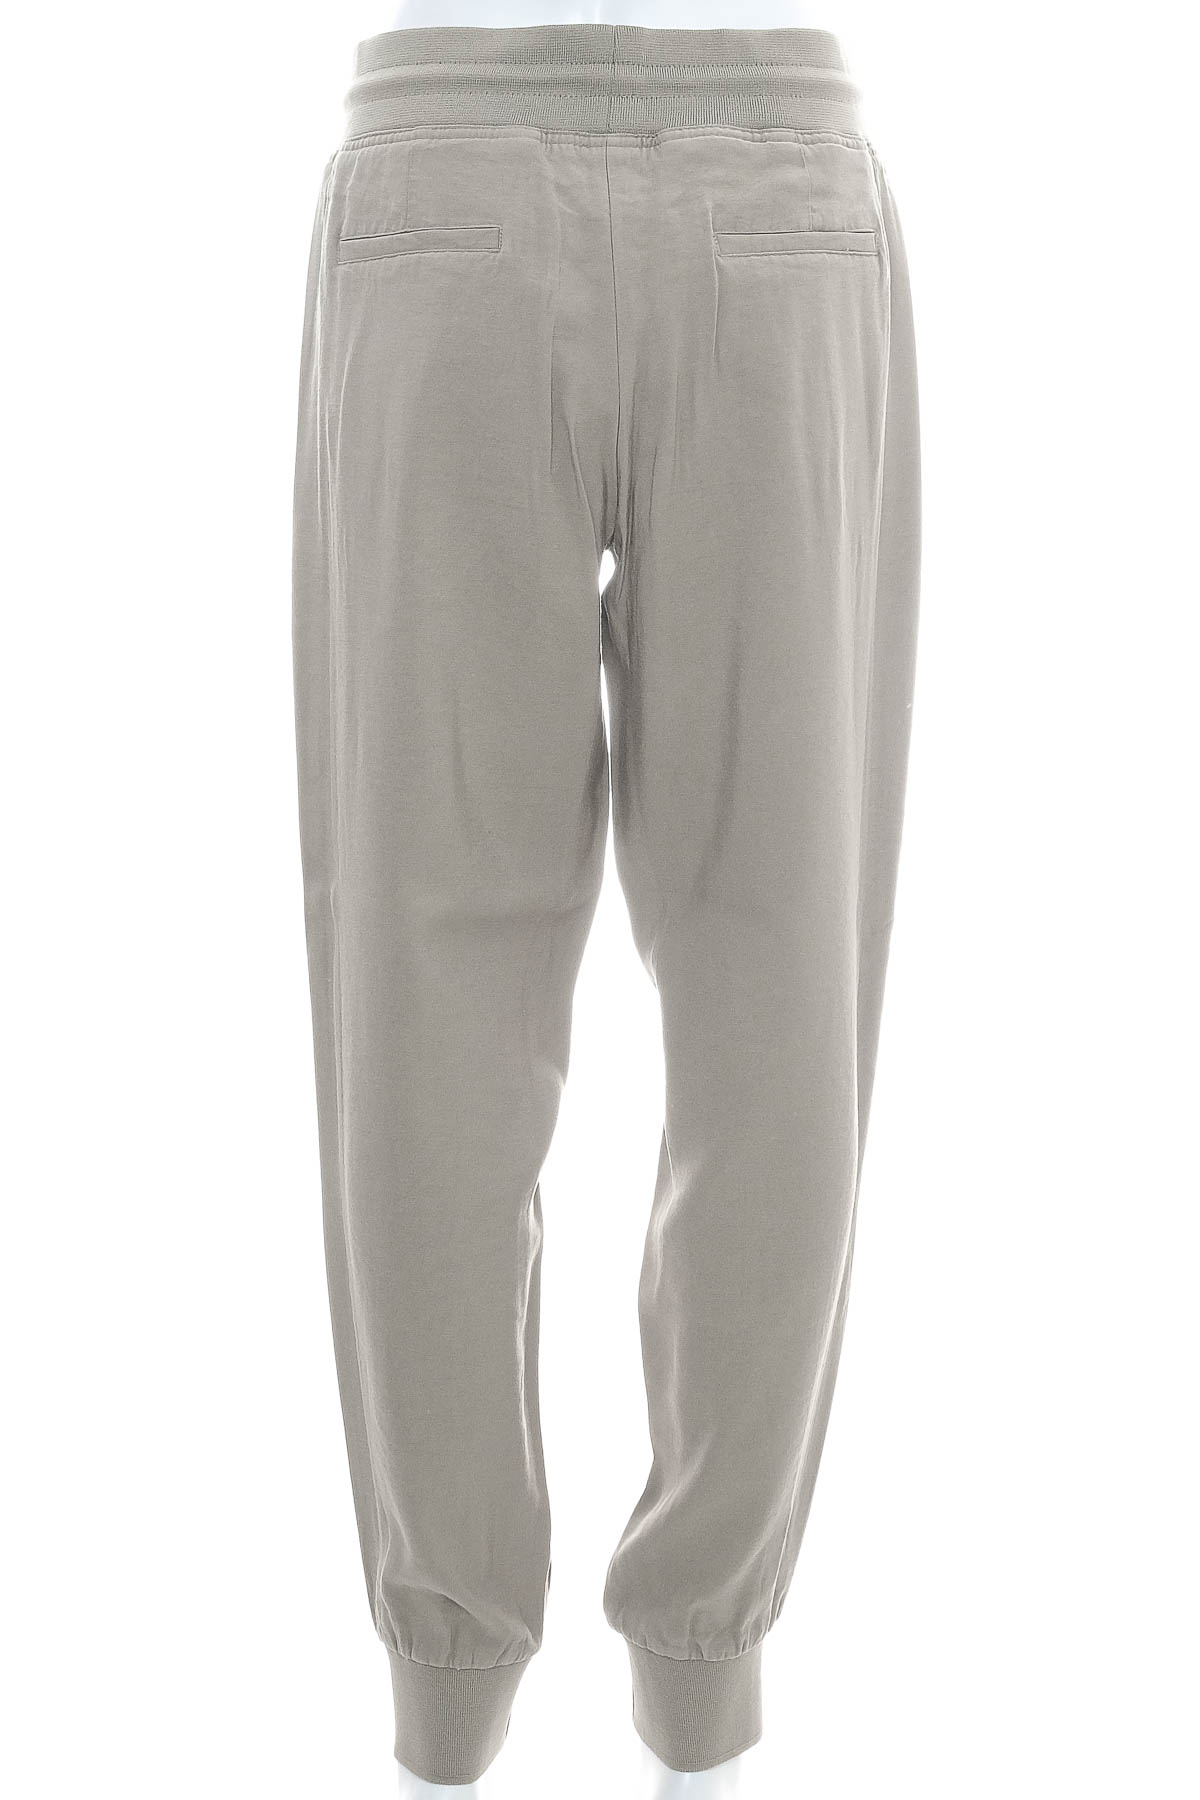 Women's trousers - More & More - 1